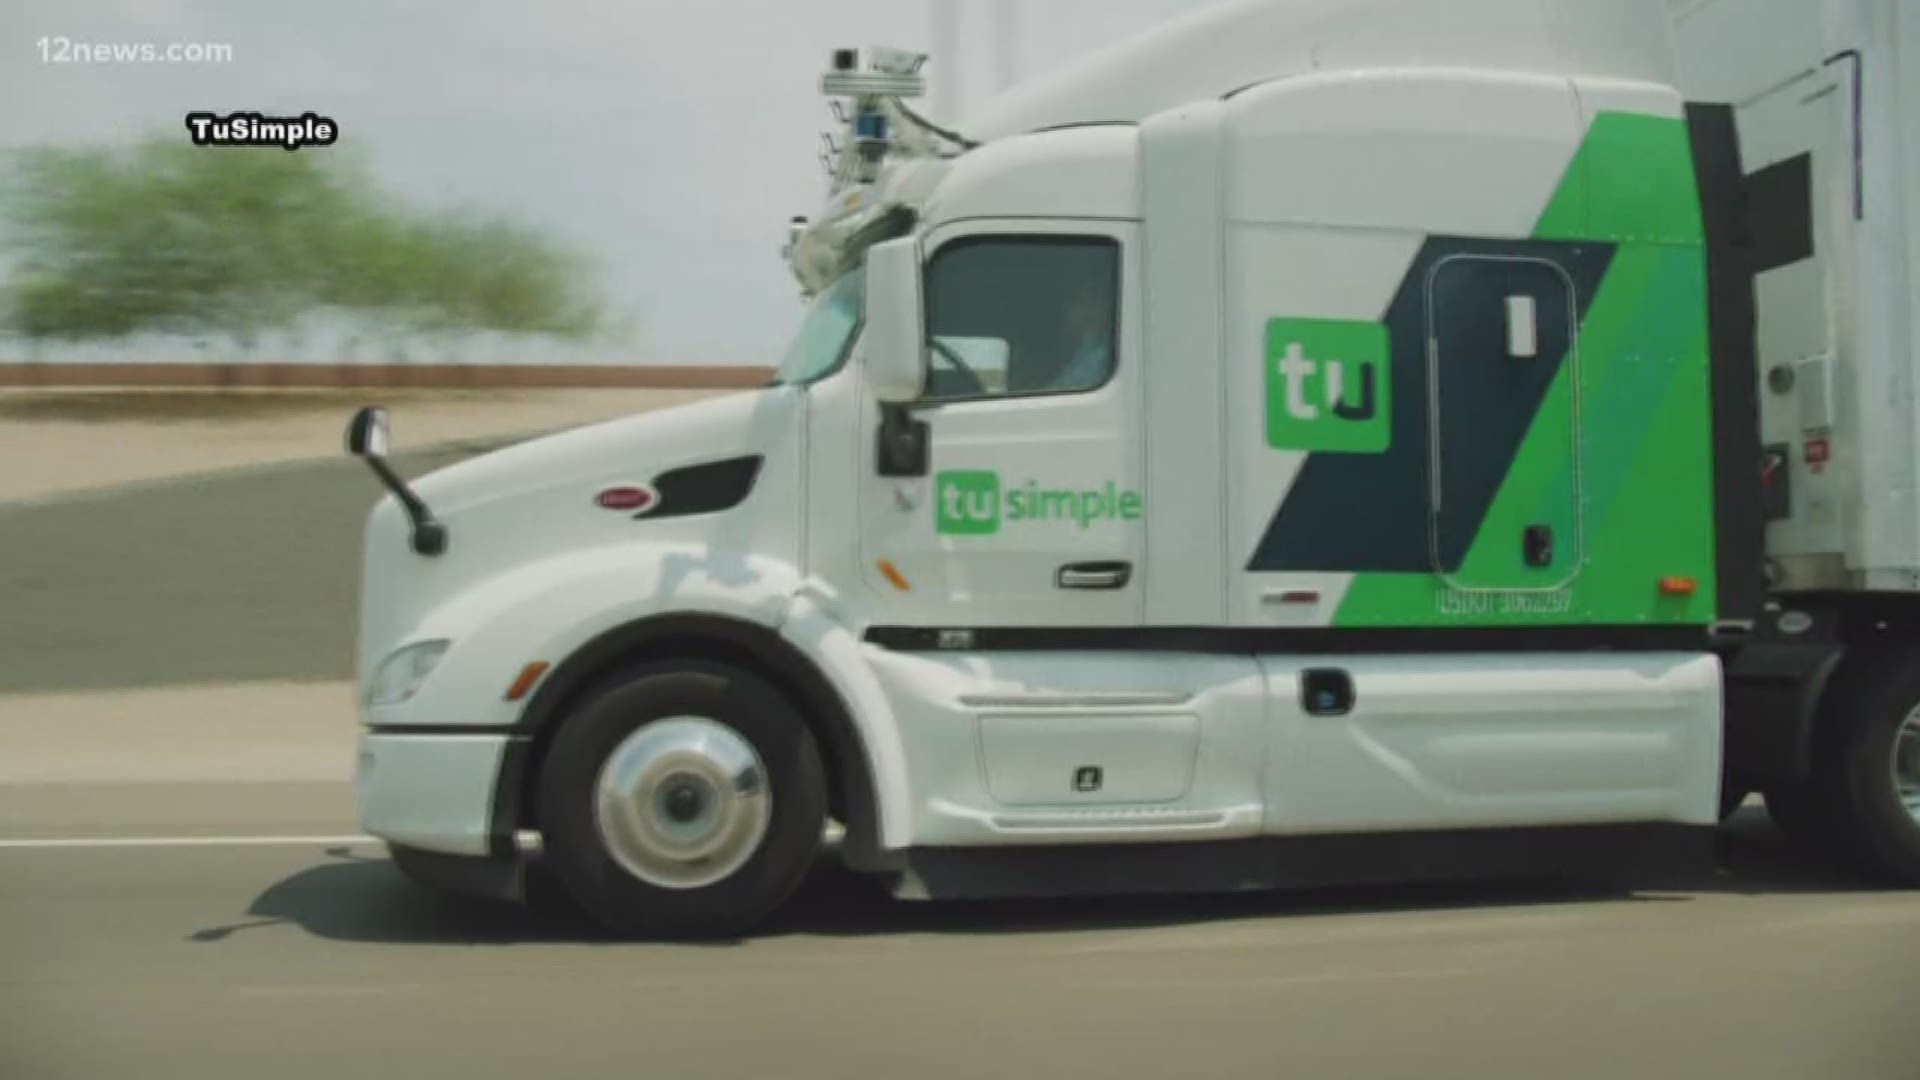 Tu-Simple is helping USPS test autonomous semi-trucks to carry mail and packages on five round trips between Phoenix and Dallas. A driver and safety engineer will be on board to monitor the trucks.